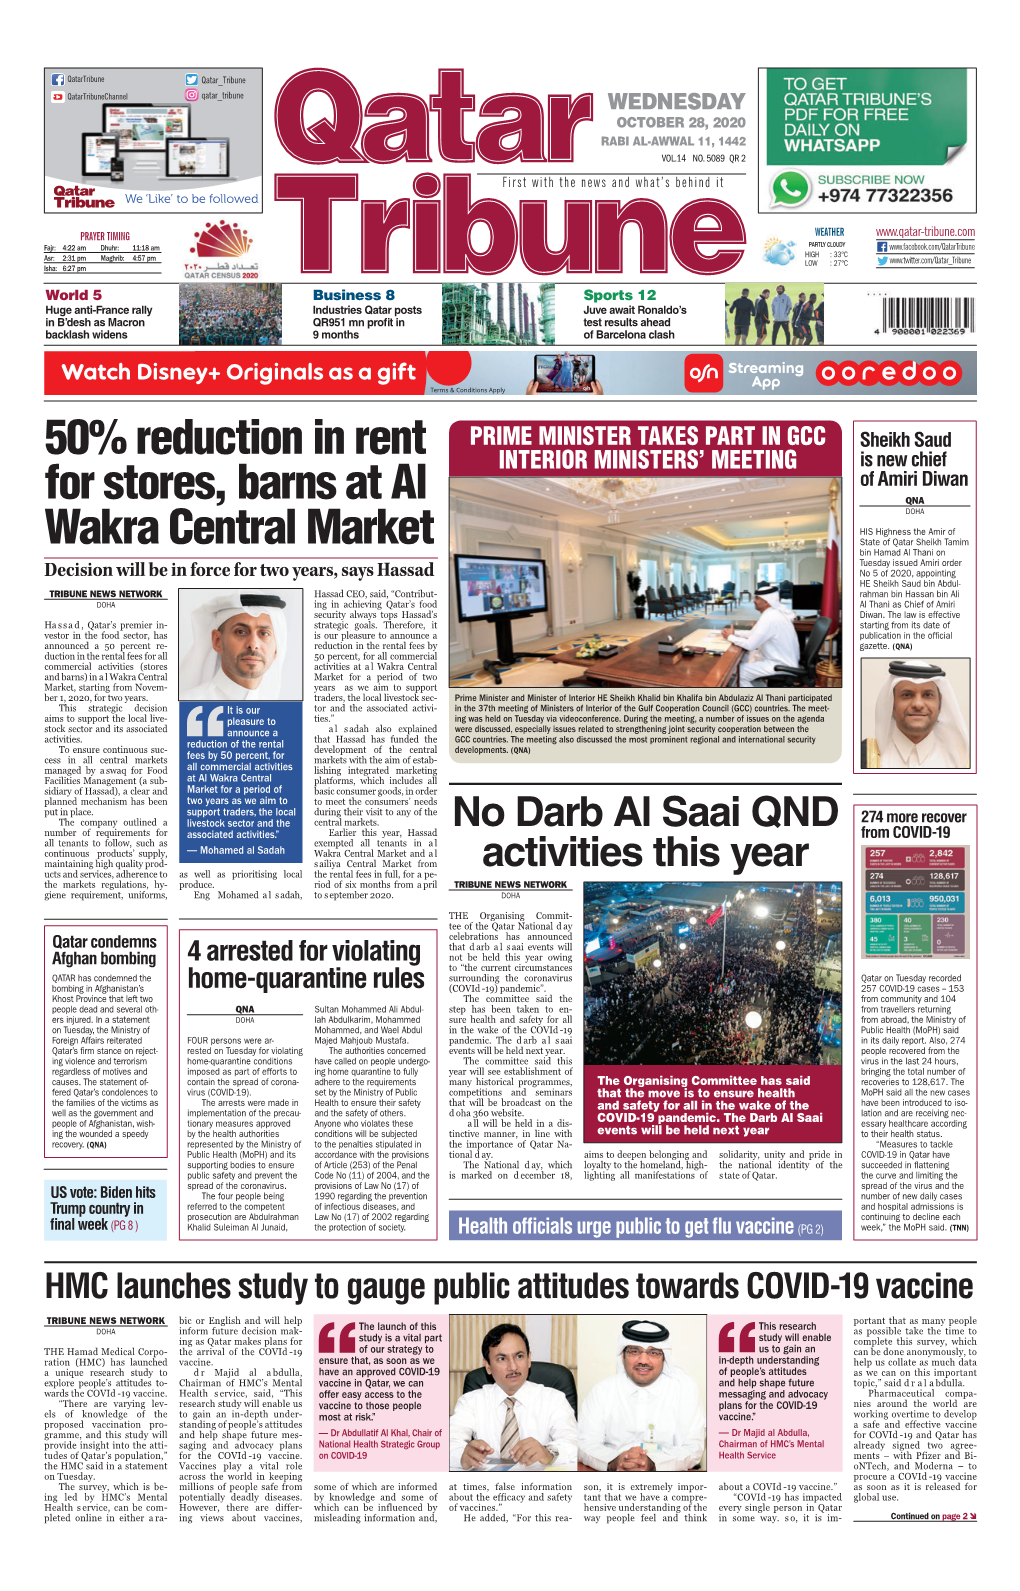 50% Reduction in Rent for Stores, Barns at Al Wakra Central Market